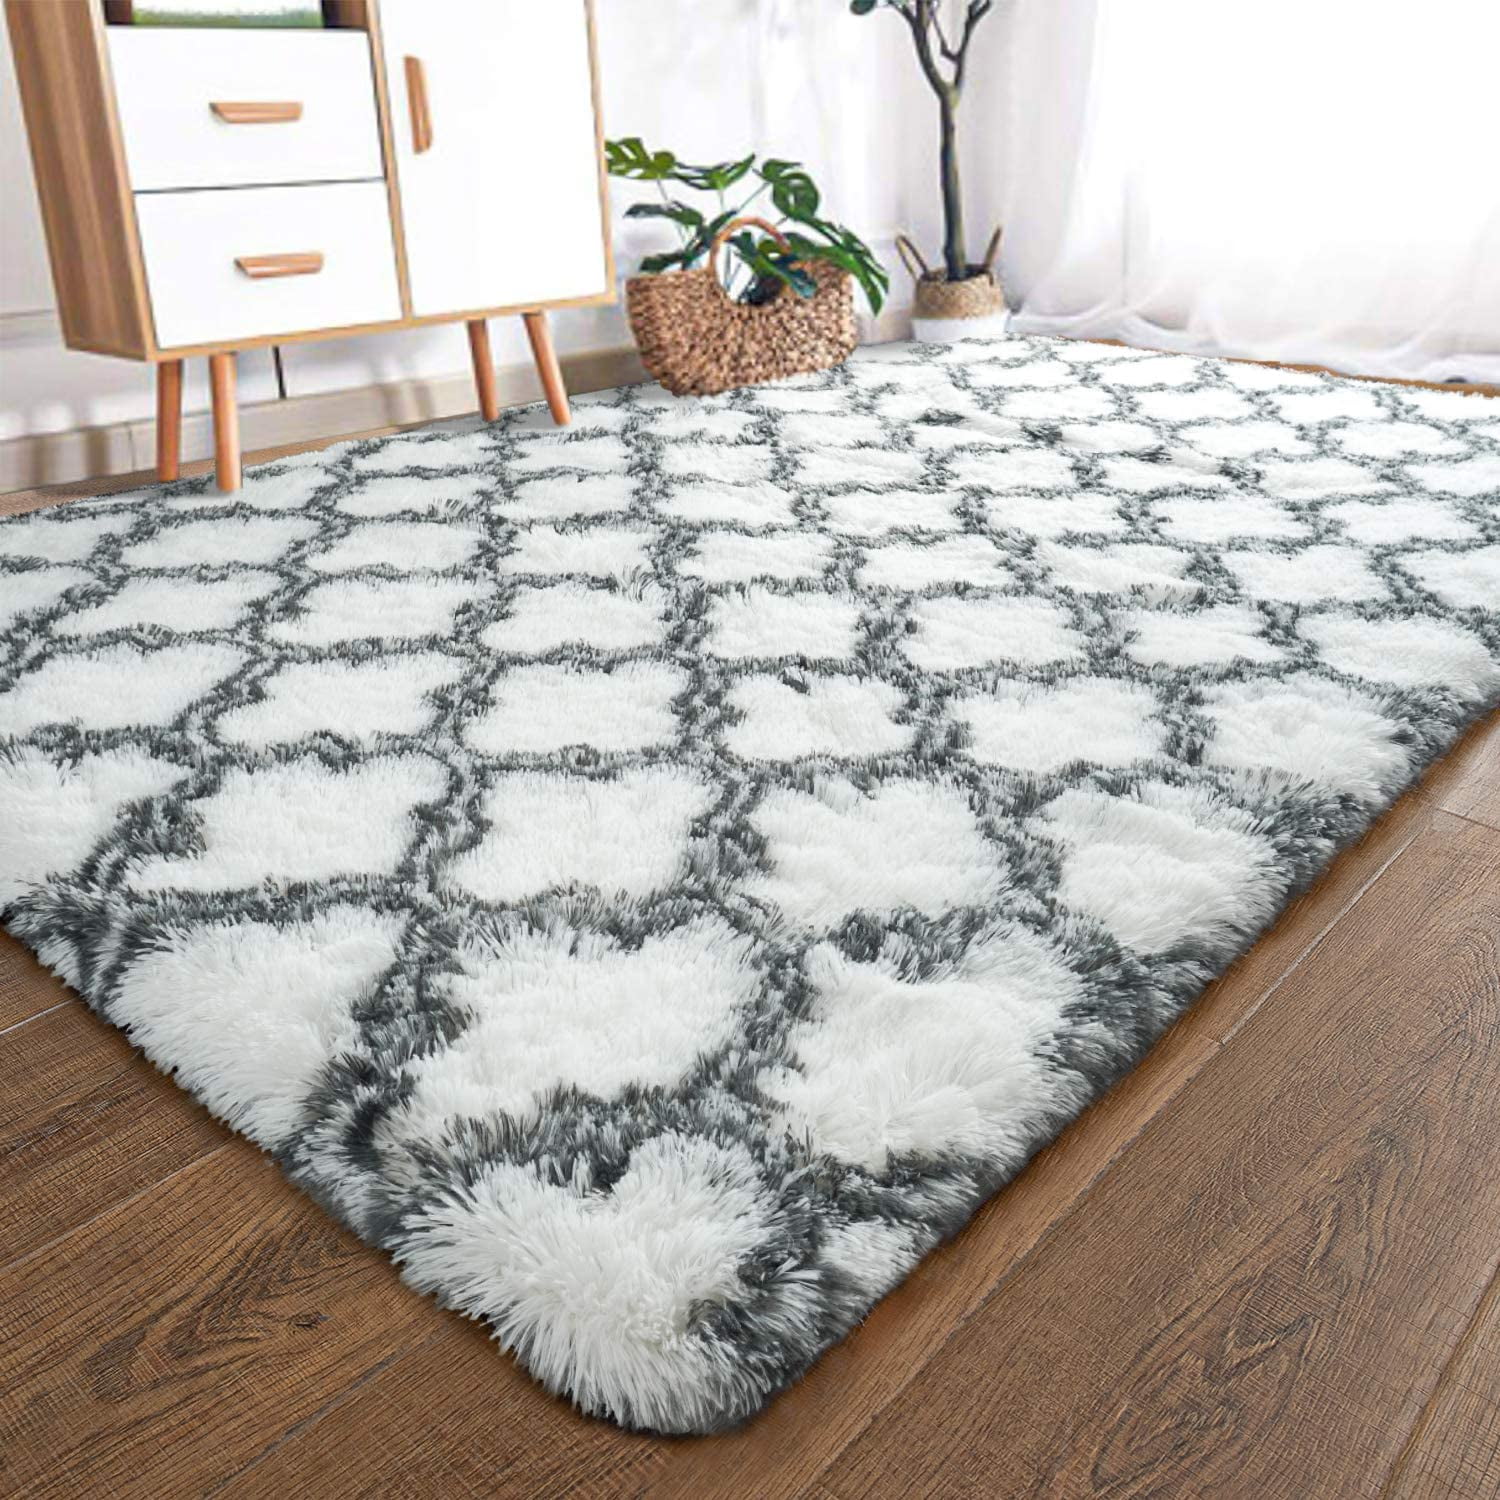 SALE CLEARANCE DISCOUNT SPARKLE NON SHED SHAGGY GREEN BEIGE SILVER RED BROWN RUG 